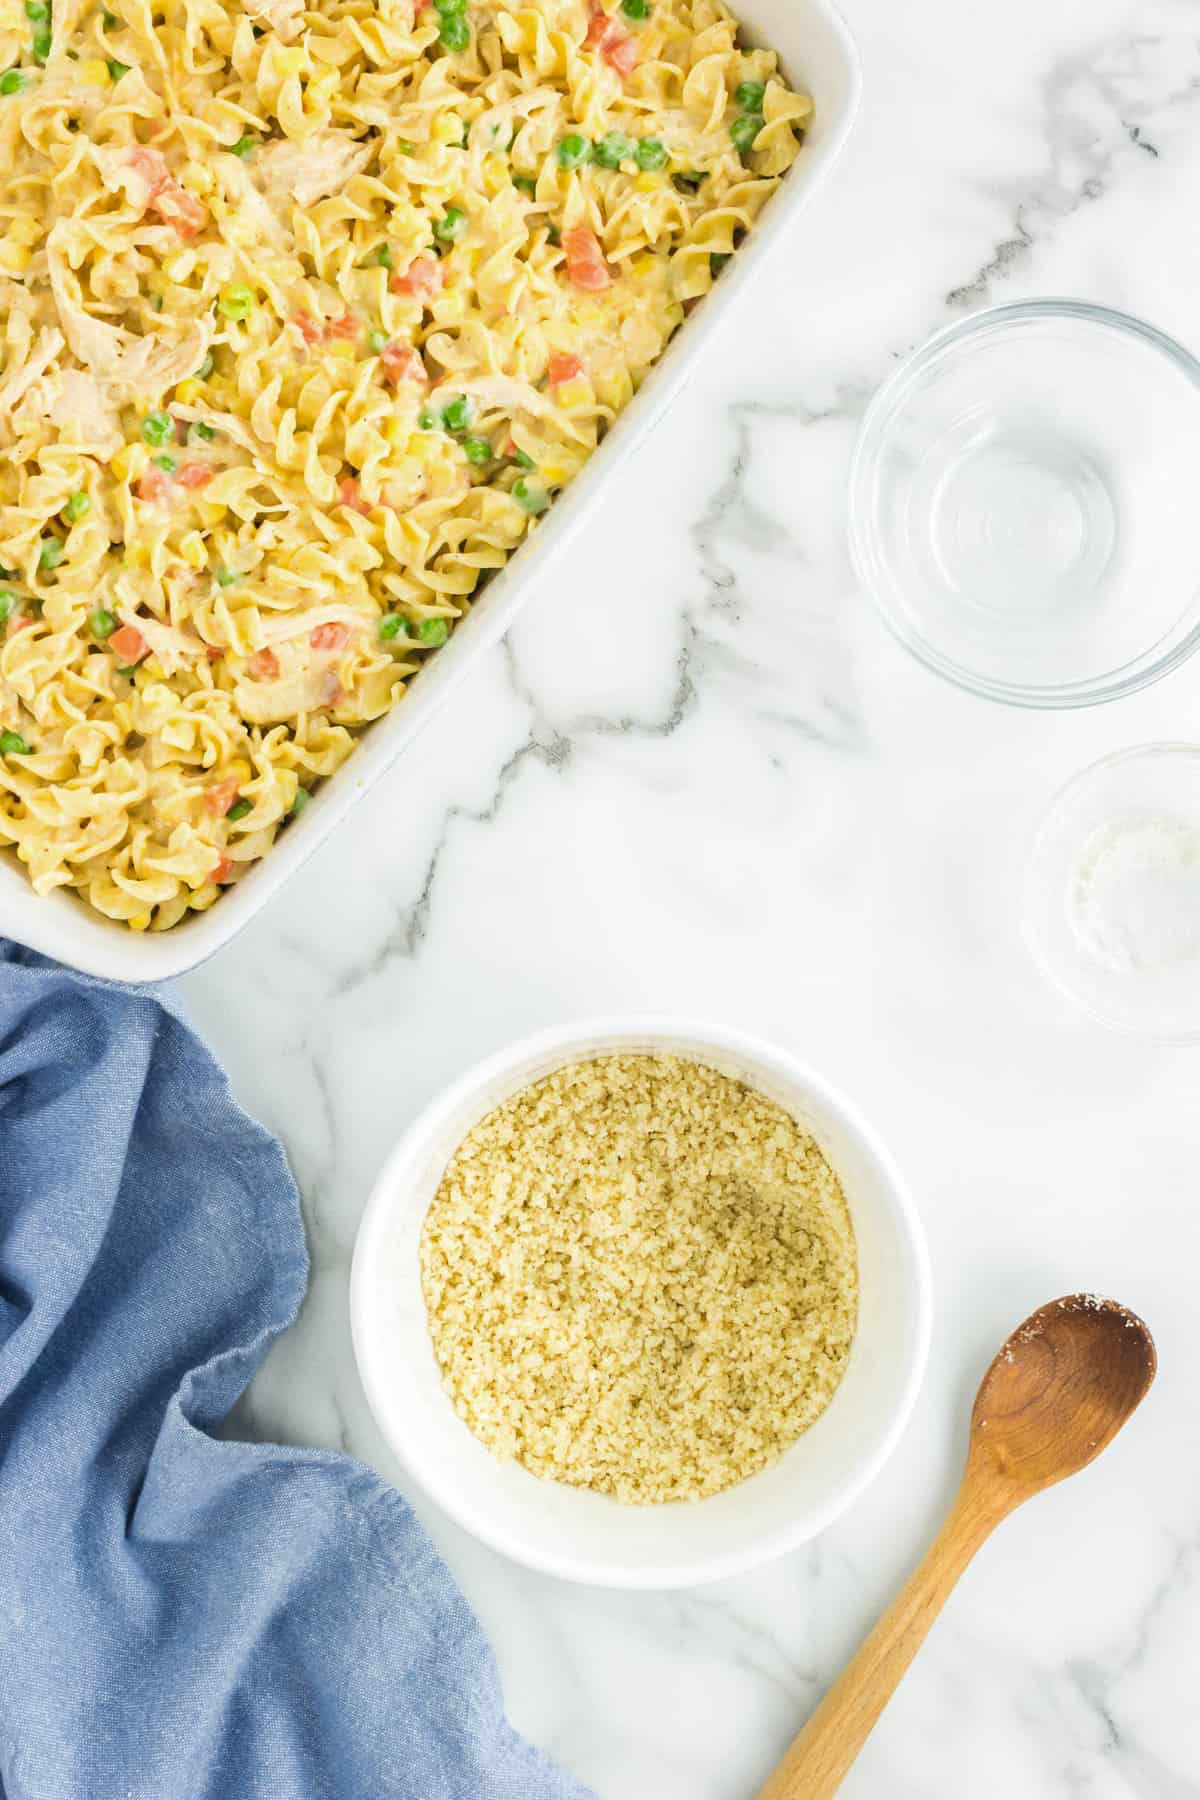 Topping Chicken Noodle Casserole with panko crumbs in glass baking dish